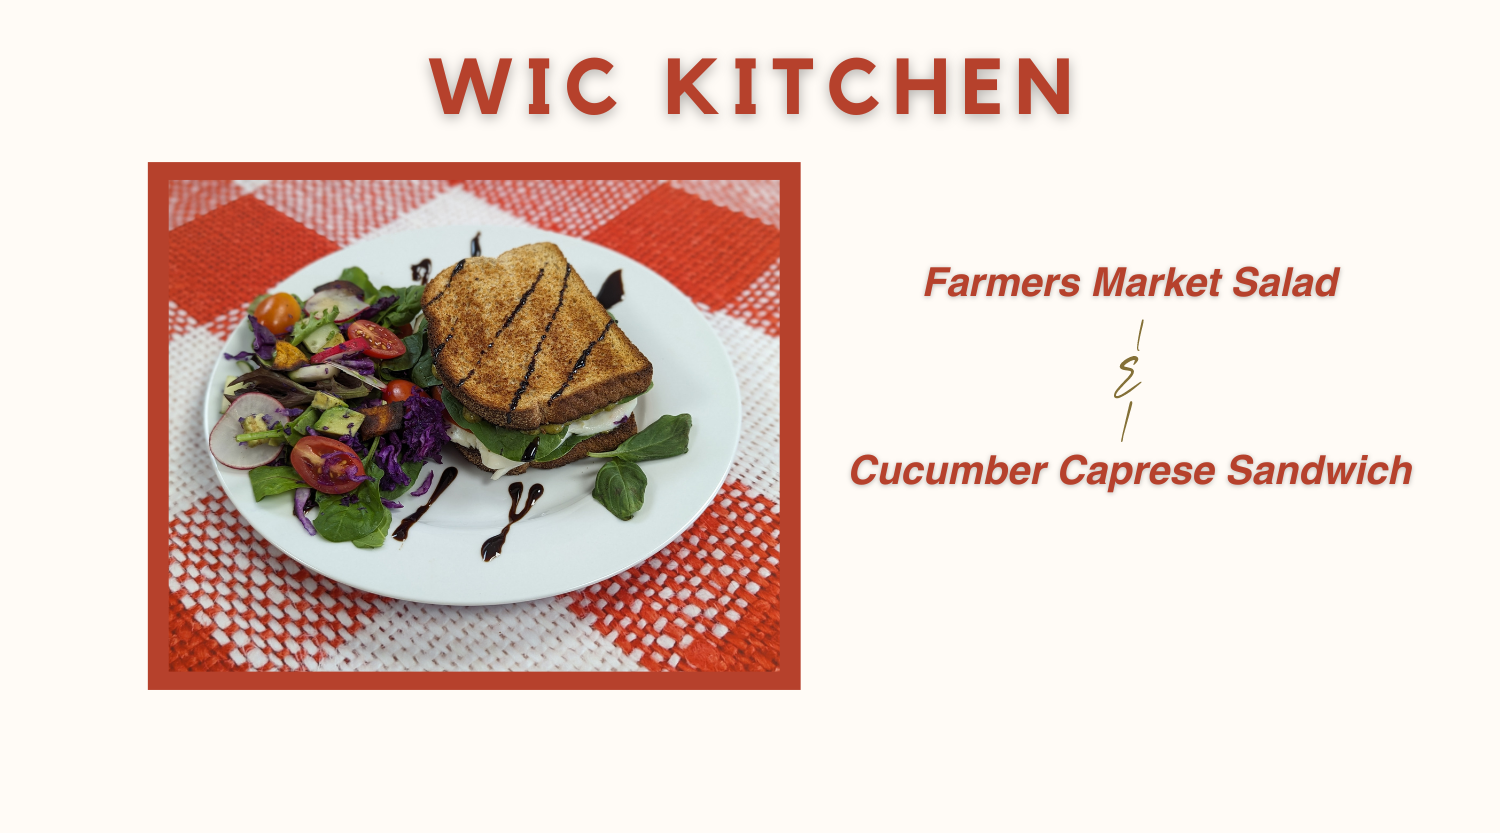 WIC Kitchen: Fresh from the farmers market